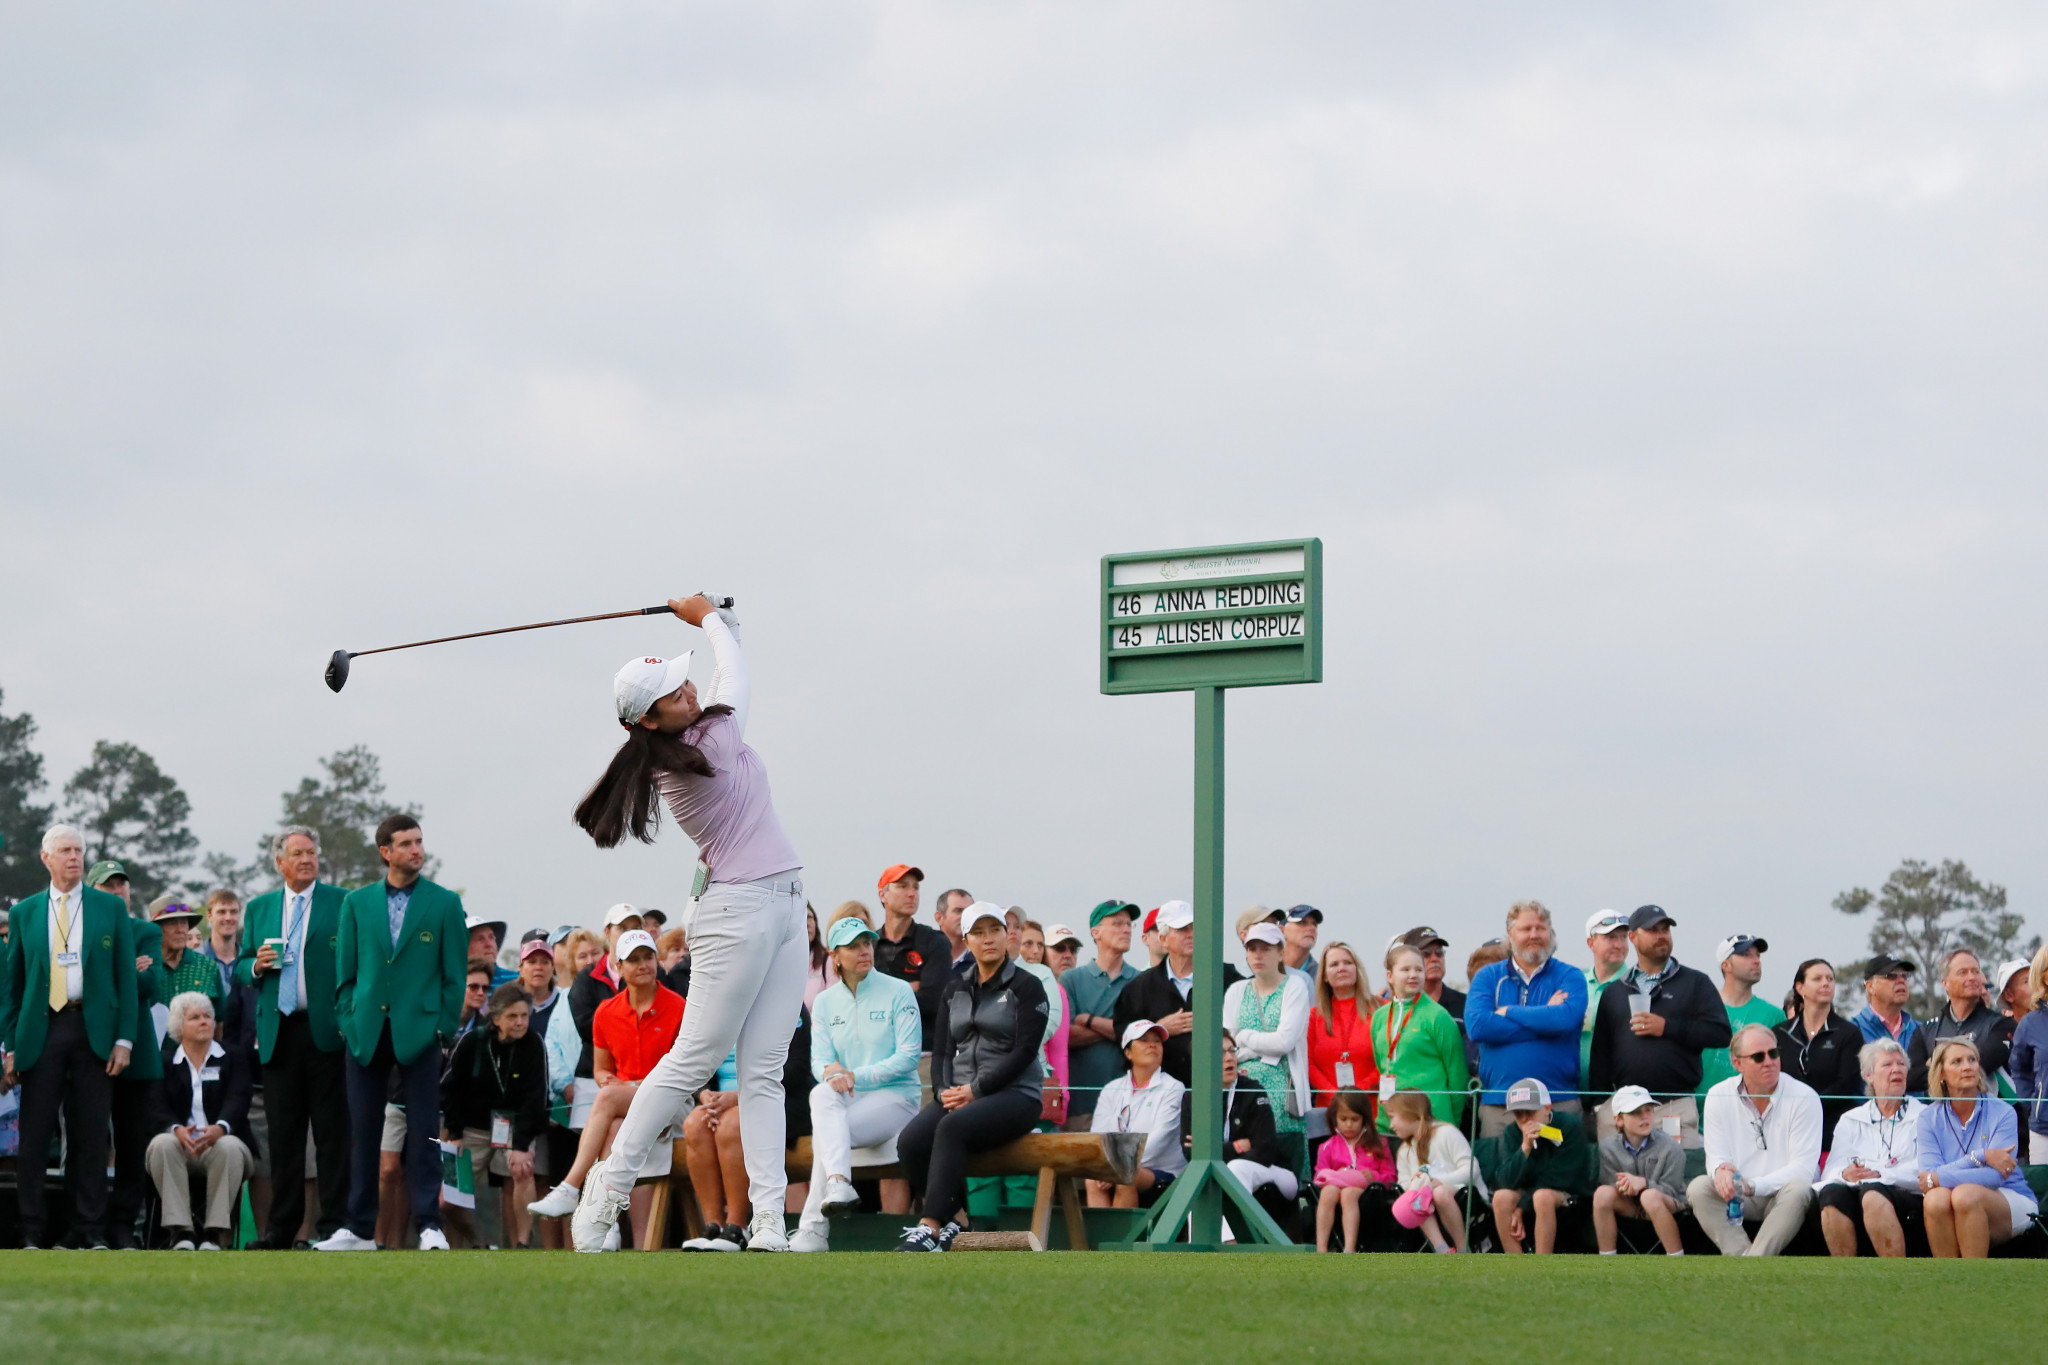 Ladies Professional Golf Association legends hit ceremonial tee shots to open the first competitive round of women's golf to be held at Augusta National ©Getty Images